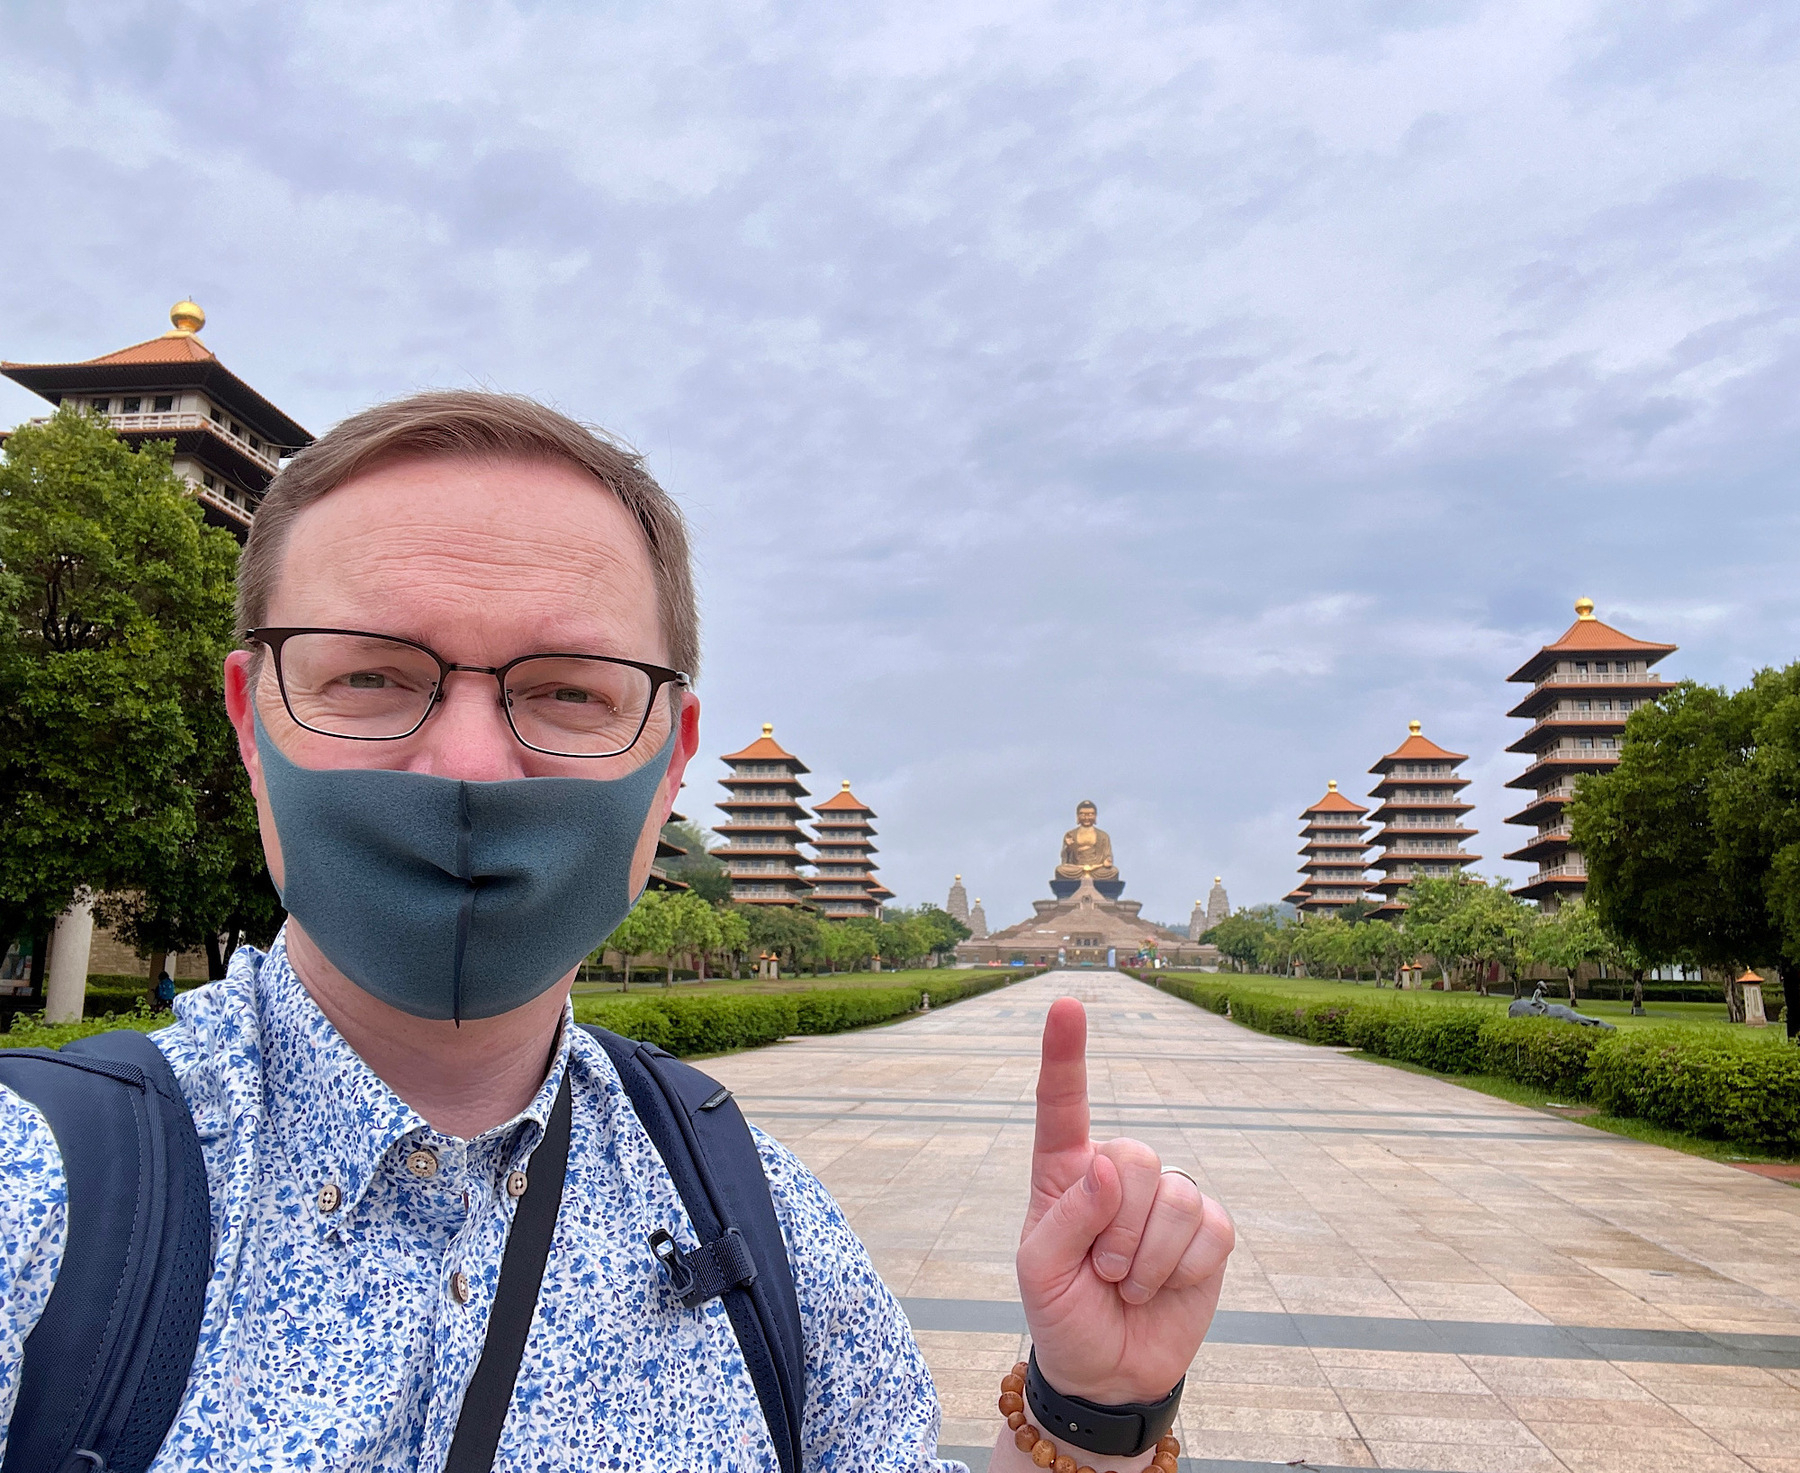 Chad selfie pointing to the Buddha statue from a distance